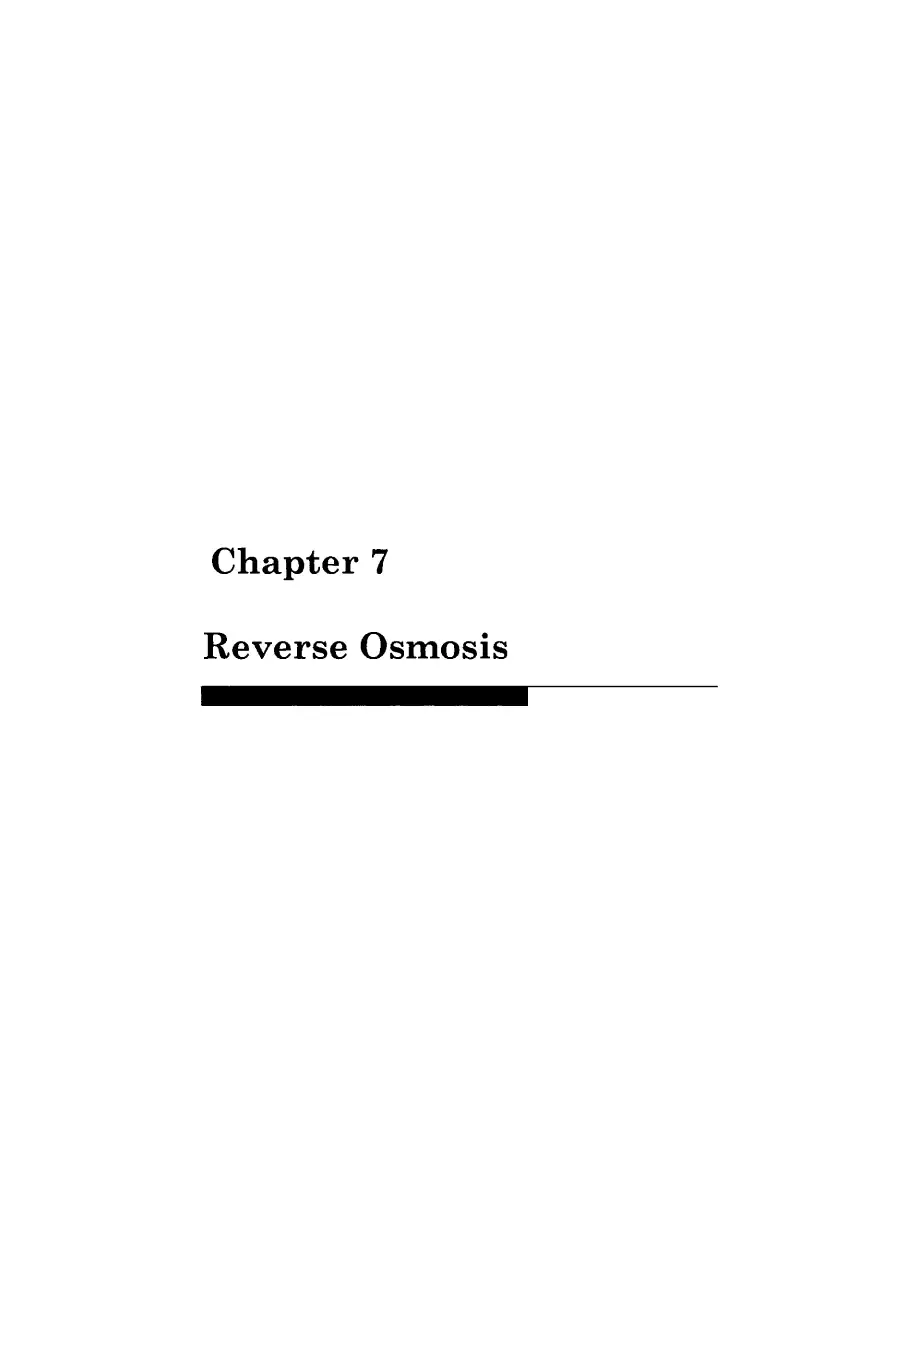 Chapter 7 Reverse Osmosis